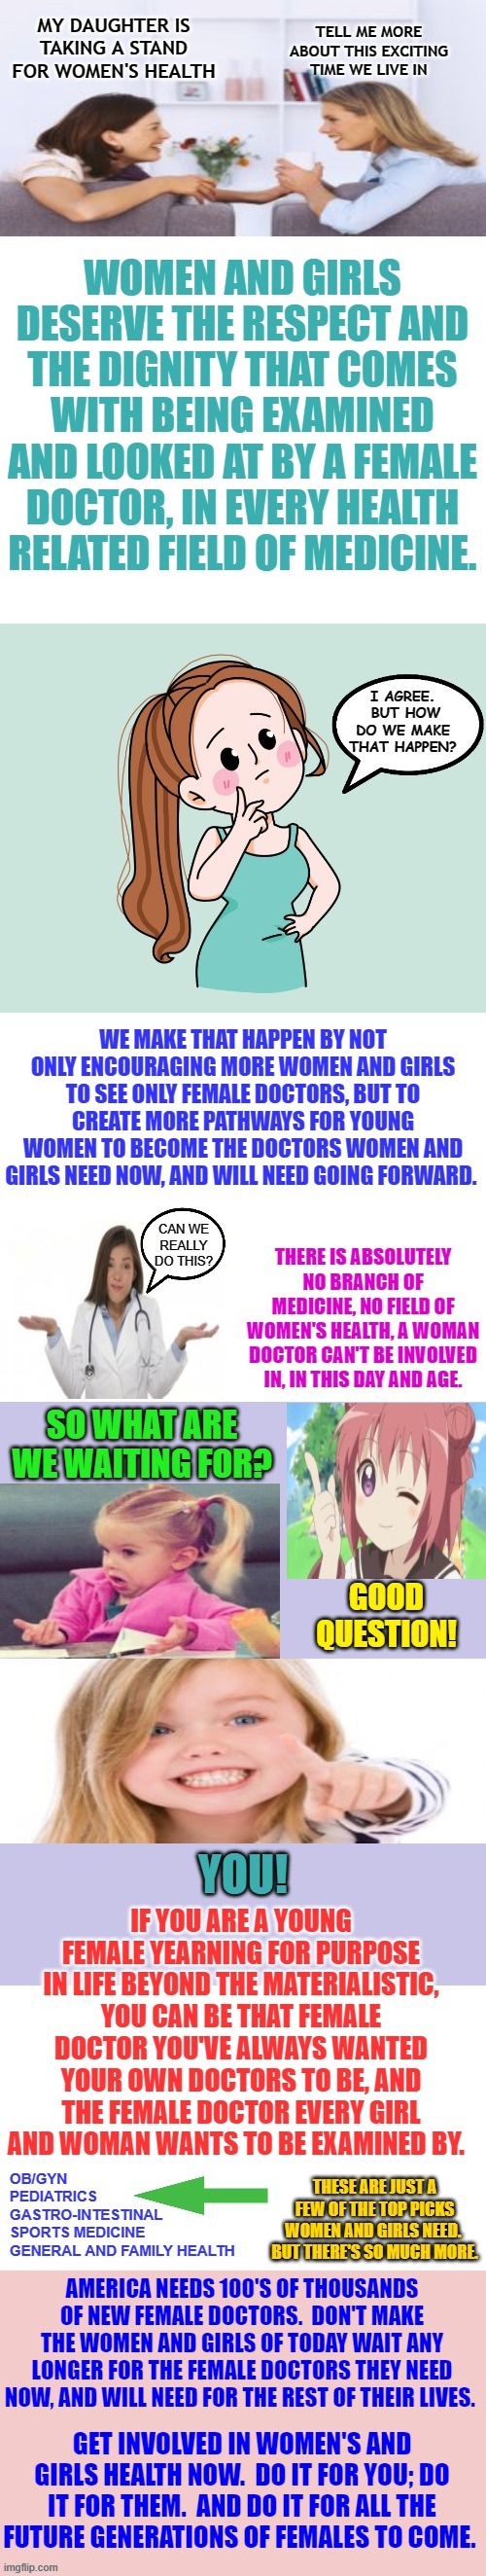 How Women Can Take Over The Reigns Of Women's/Girls Health | TELL ME MORE ABOUT THIS EXCITING TIME WE LIVE IN; MY DAUGHTER IS TAKING A STAND FOR WOMEN'S HEALTH | image tagged in memes,doctors,women,girls,health,healthcare | made w/ Imgflip meme maker